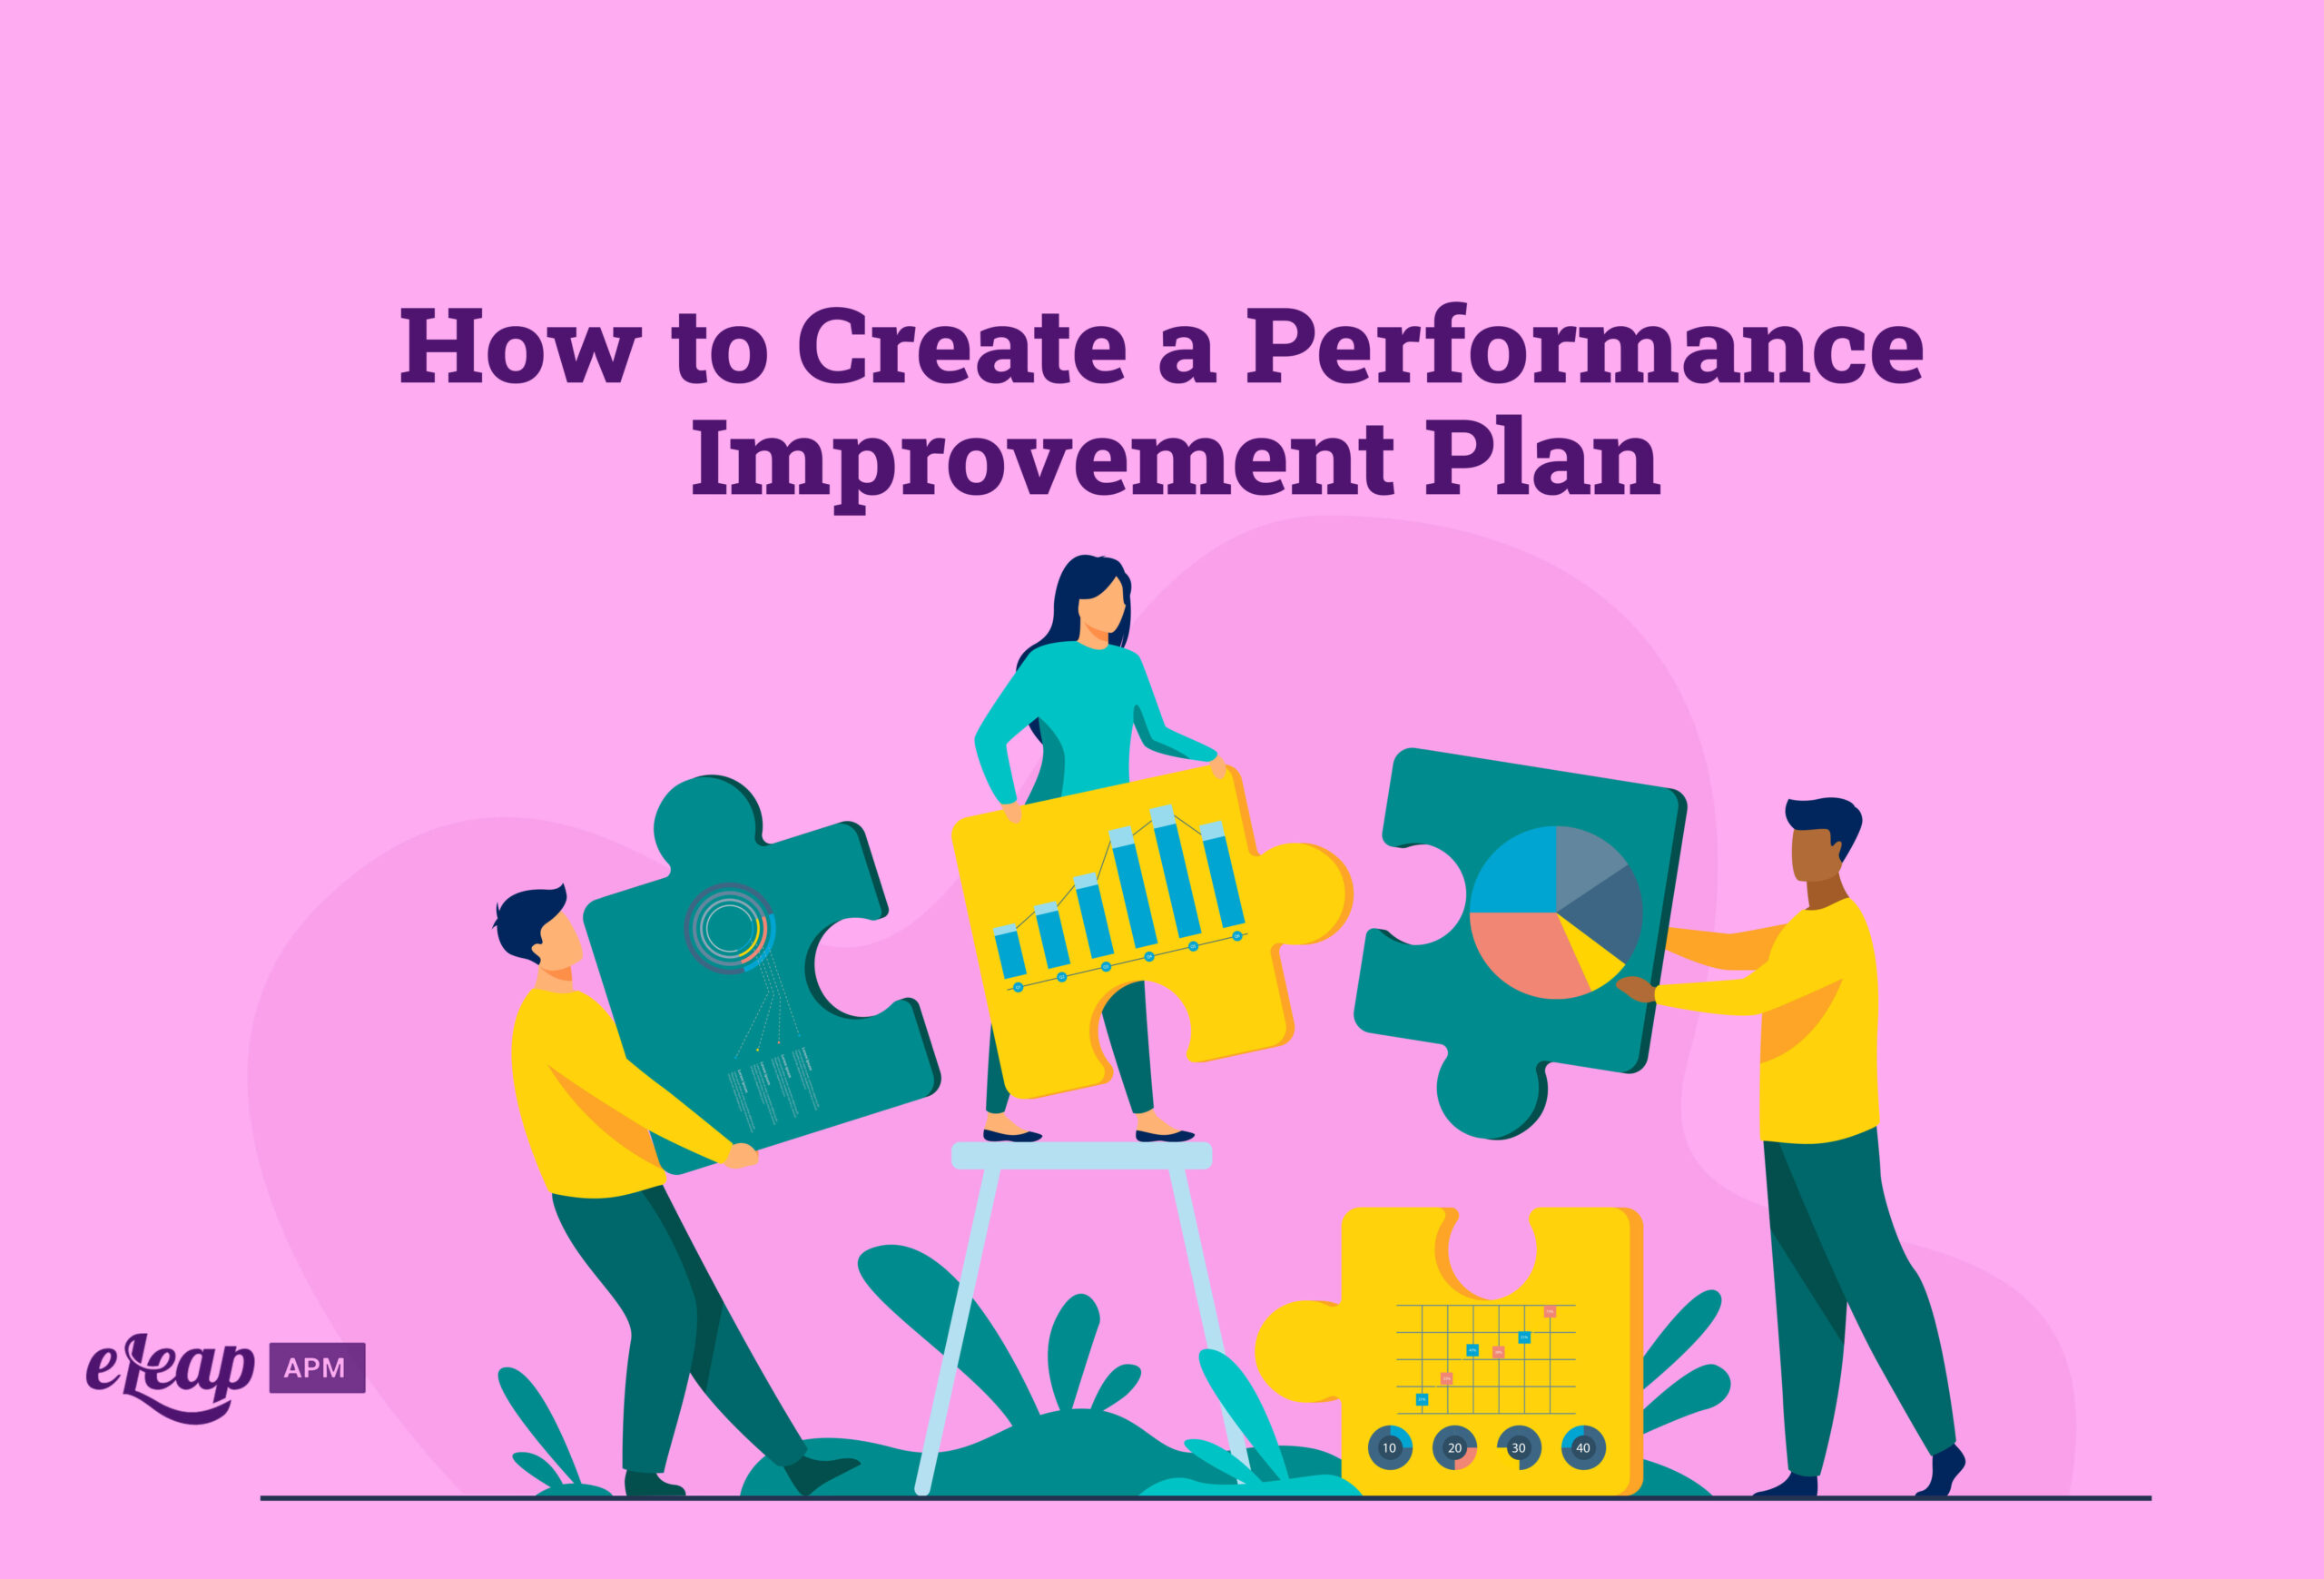 How to Create a Performance Improvement Plan